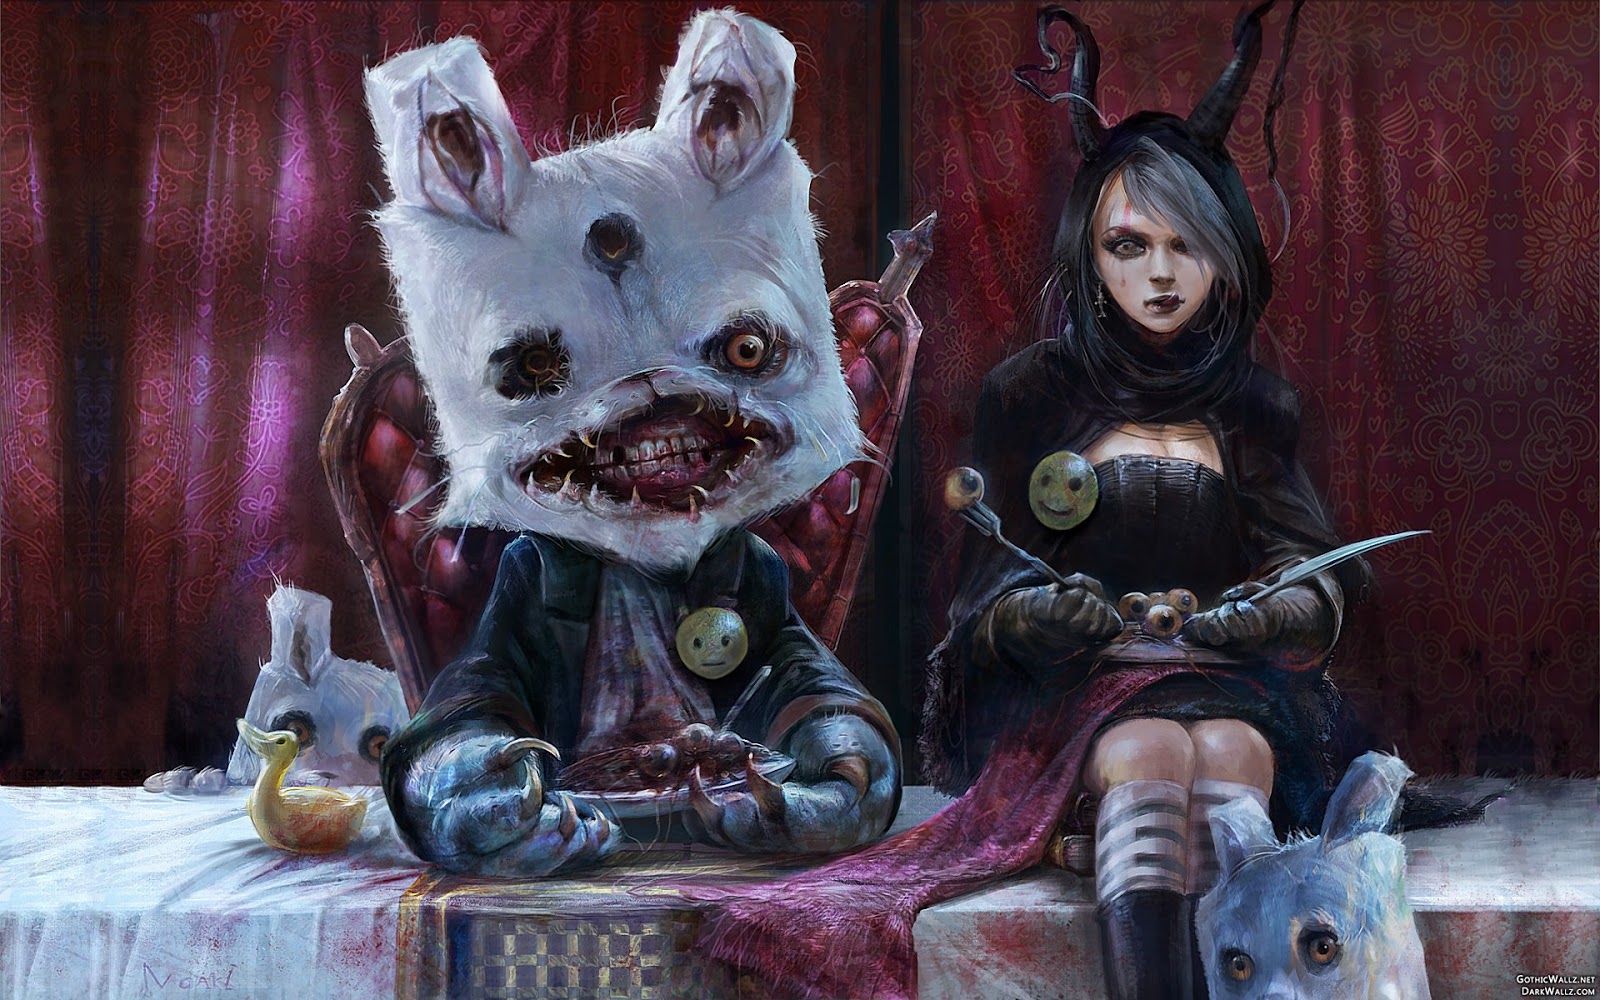  Creepy girl with her scary teddy beer | Dark Gothic Wallpaper Download